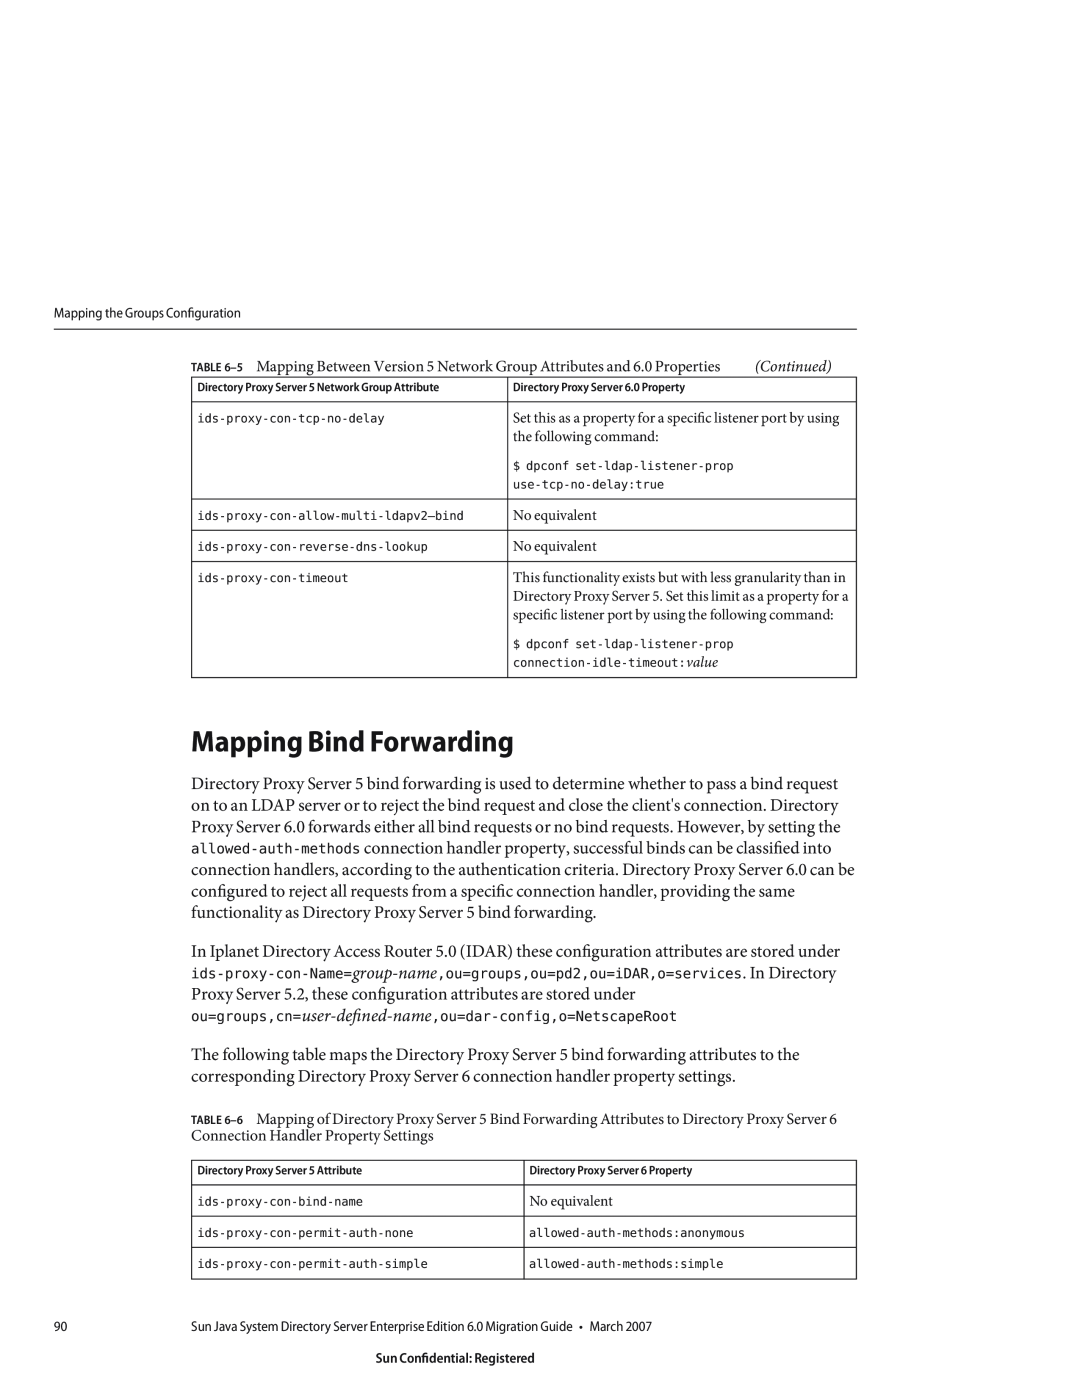 Sun Microsystems 8190994 manual Mapping Bind Forwarding, Set this as a property for a specific listener port by using 